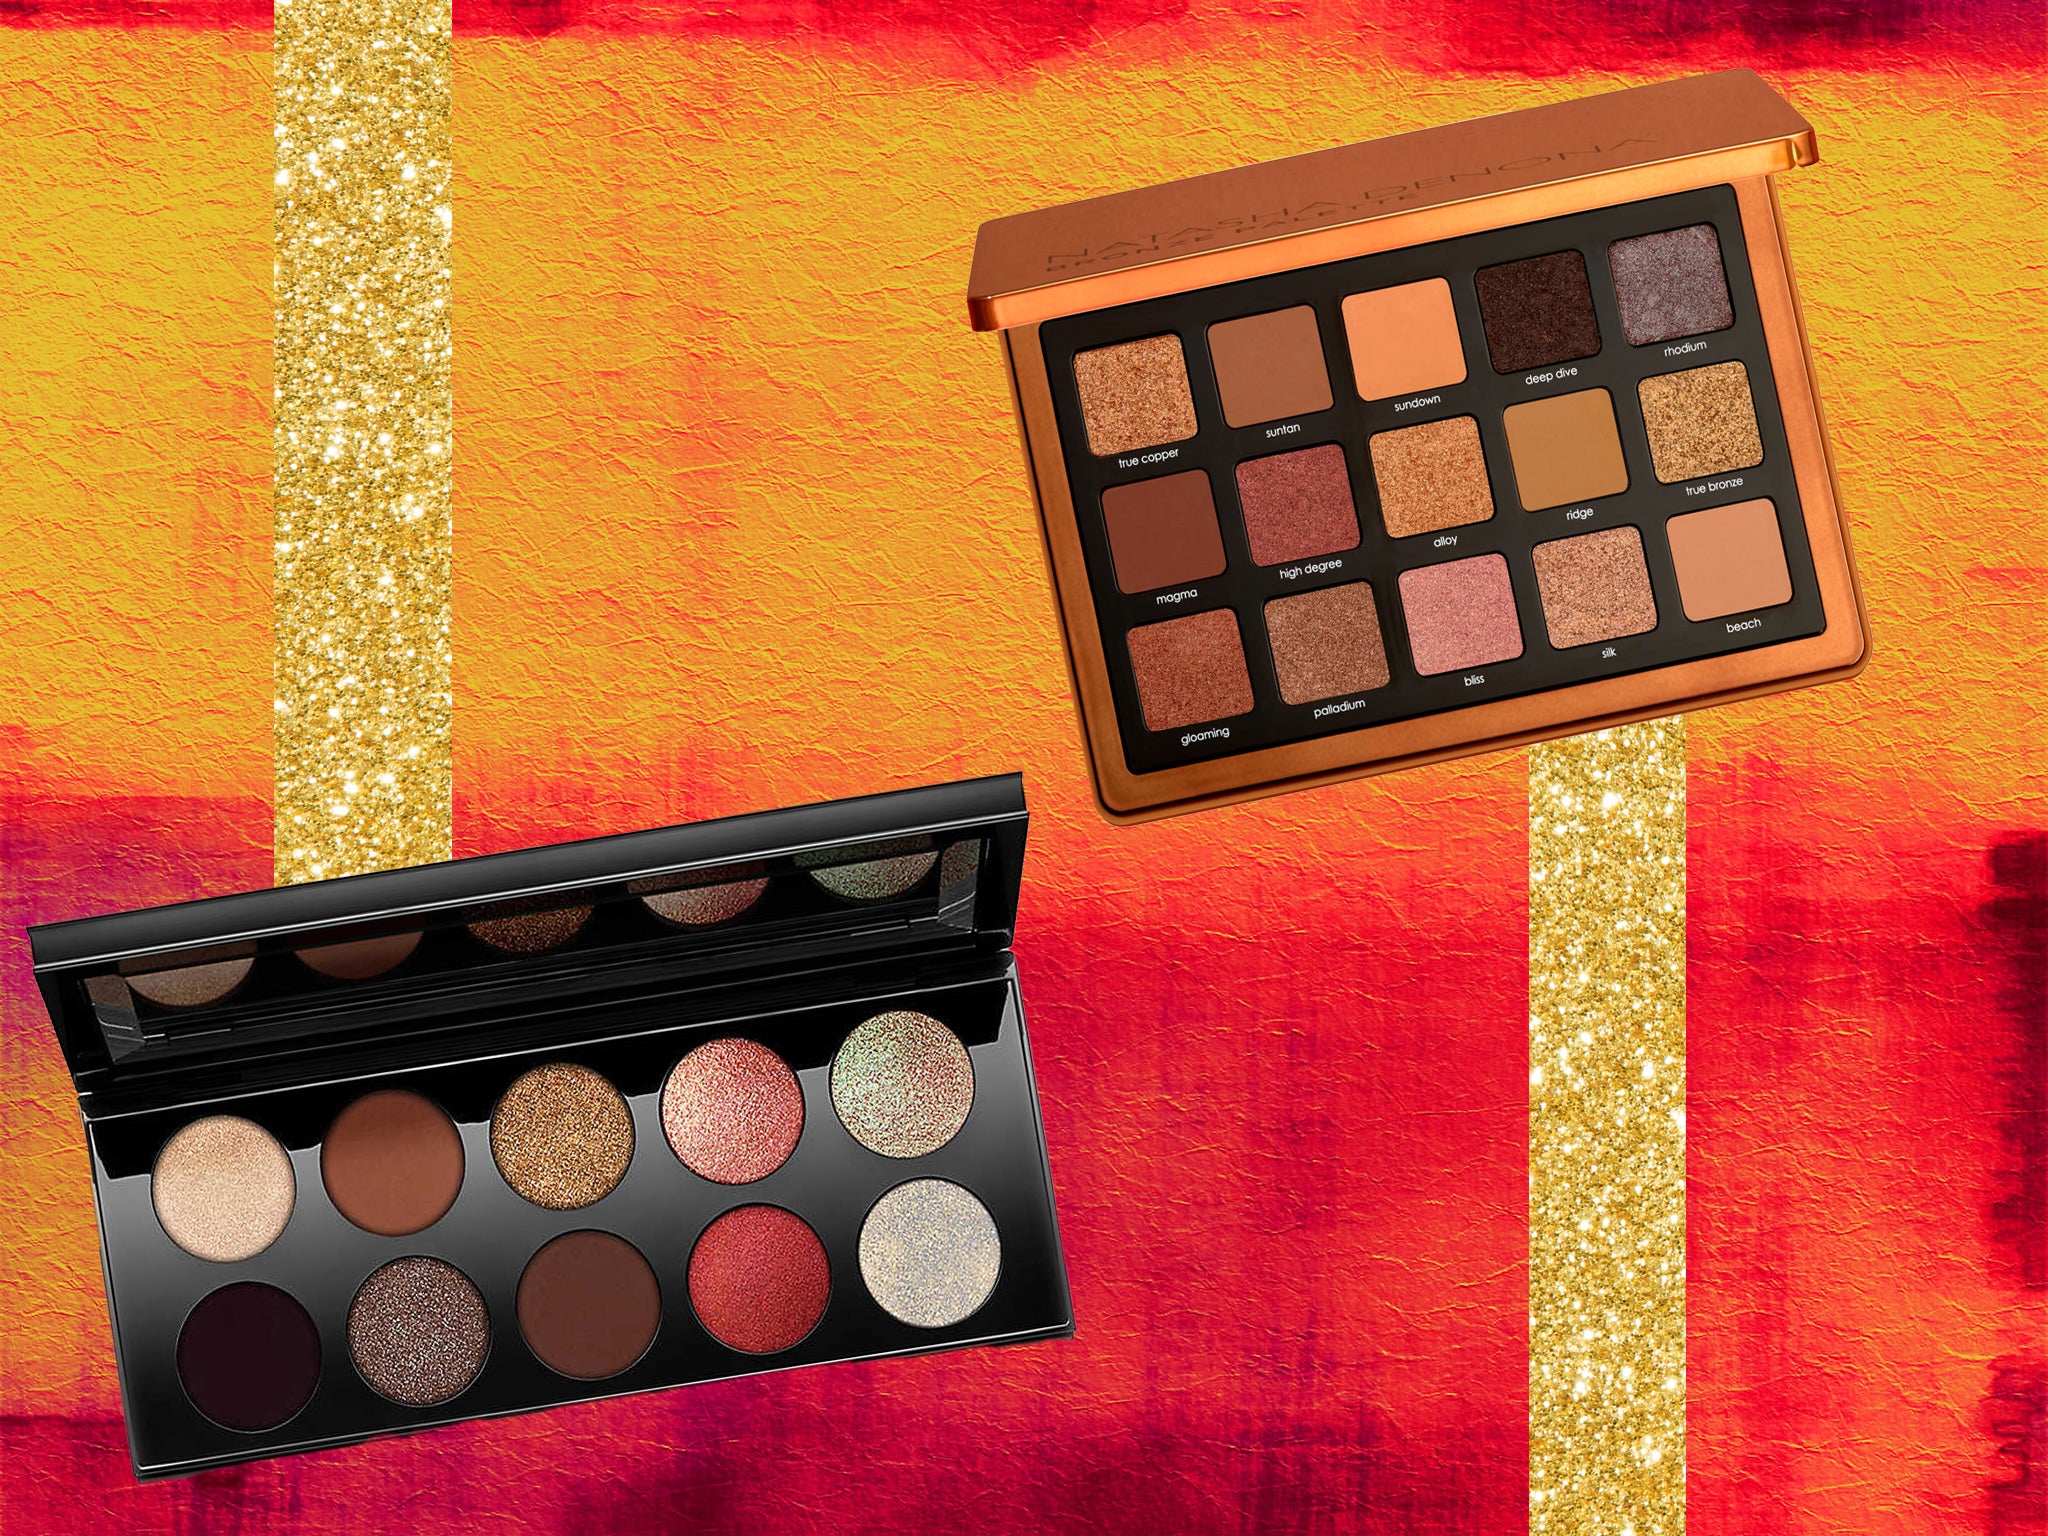 Natasha launched her ‘bronze’ palette in summer 2020, while Pat Mcgrath’s has been around since 2018